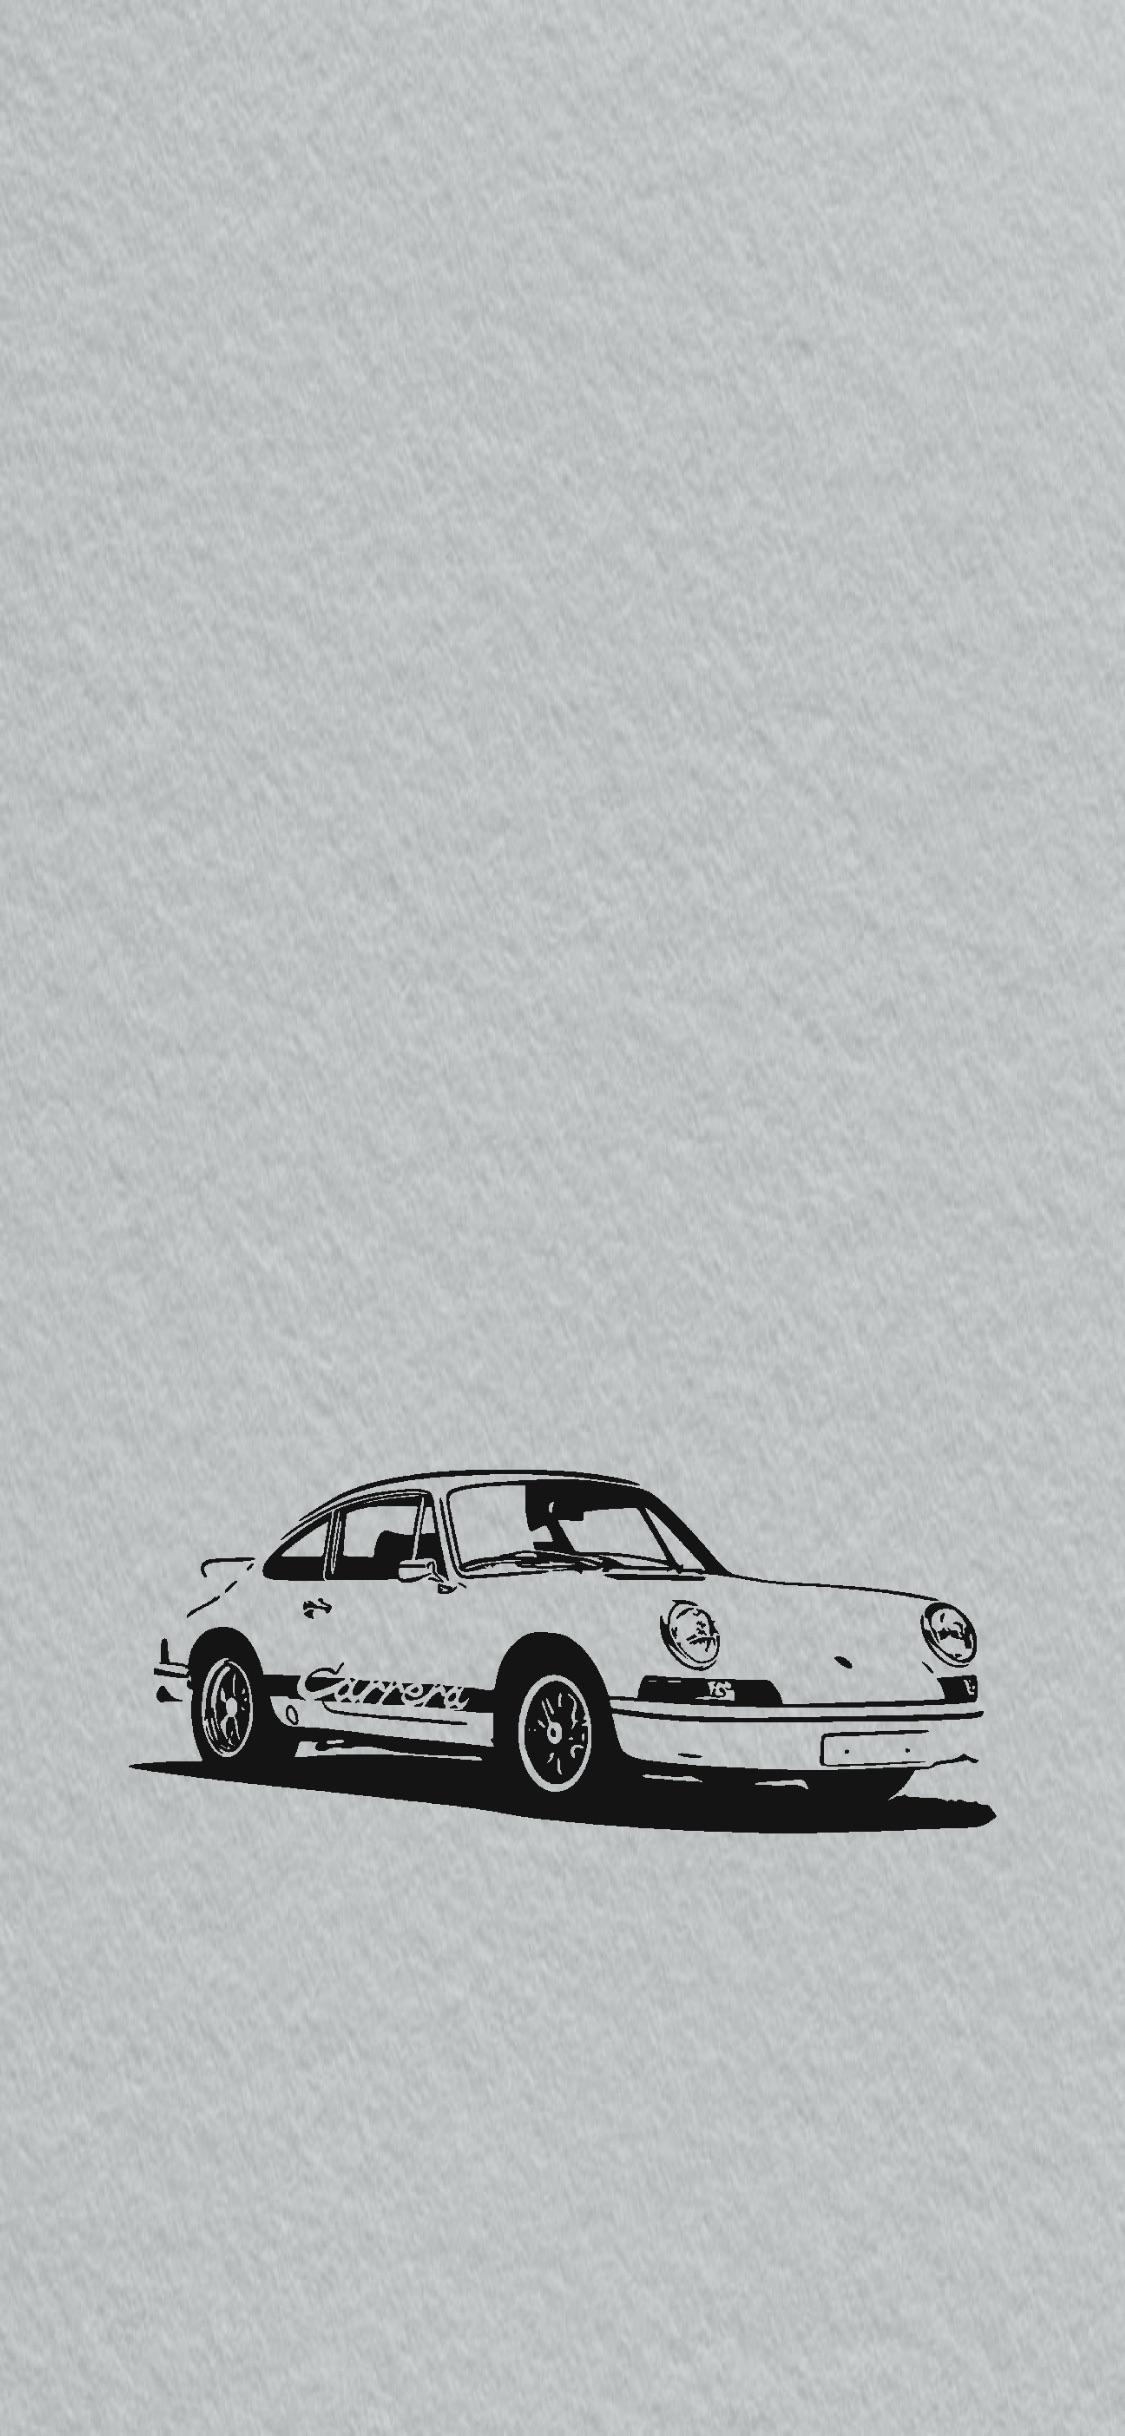 A couple of Porsche + Carrera RS iPhone (mobile) wallpaper for yah